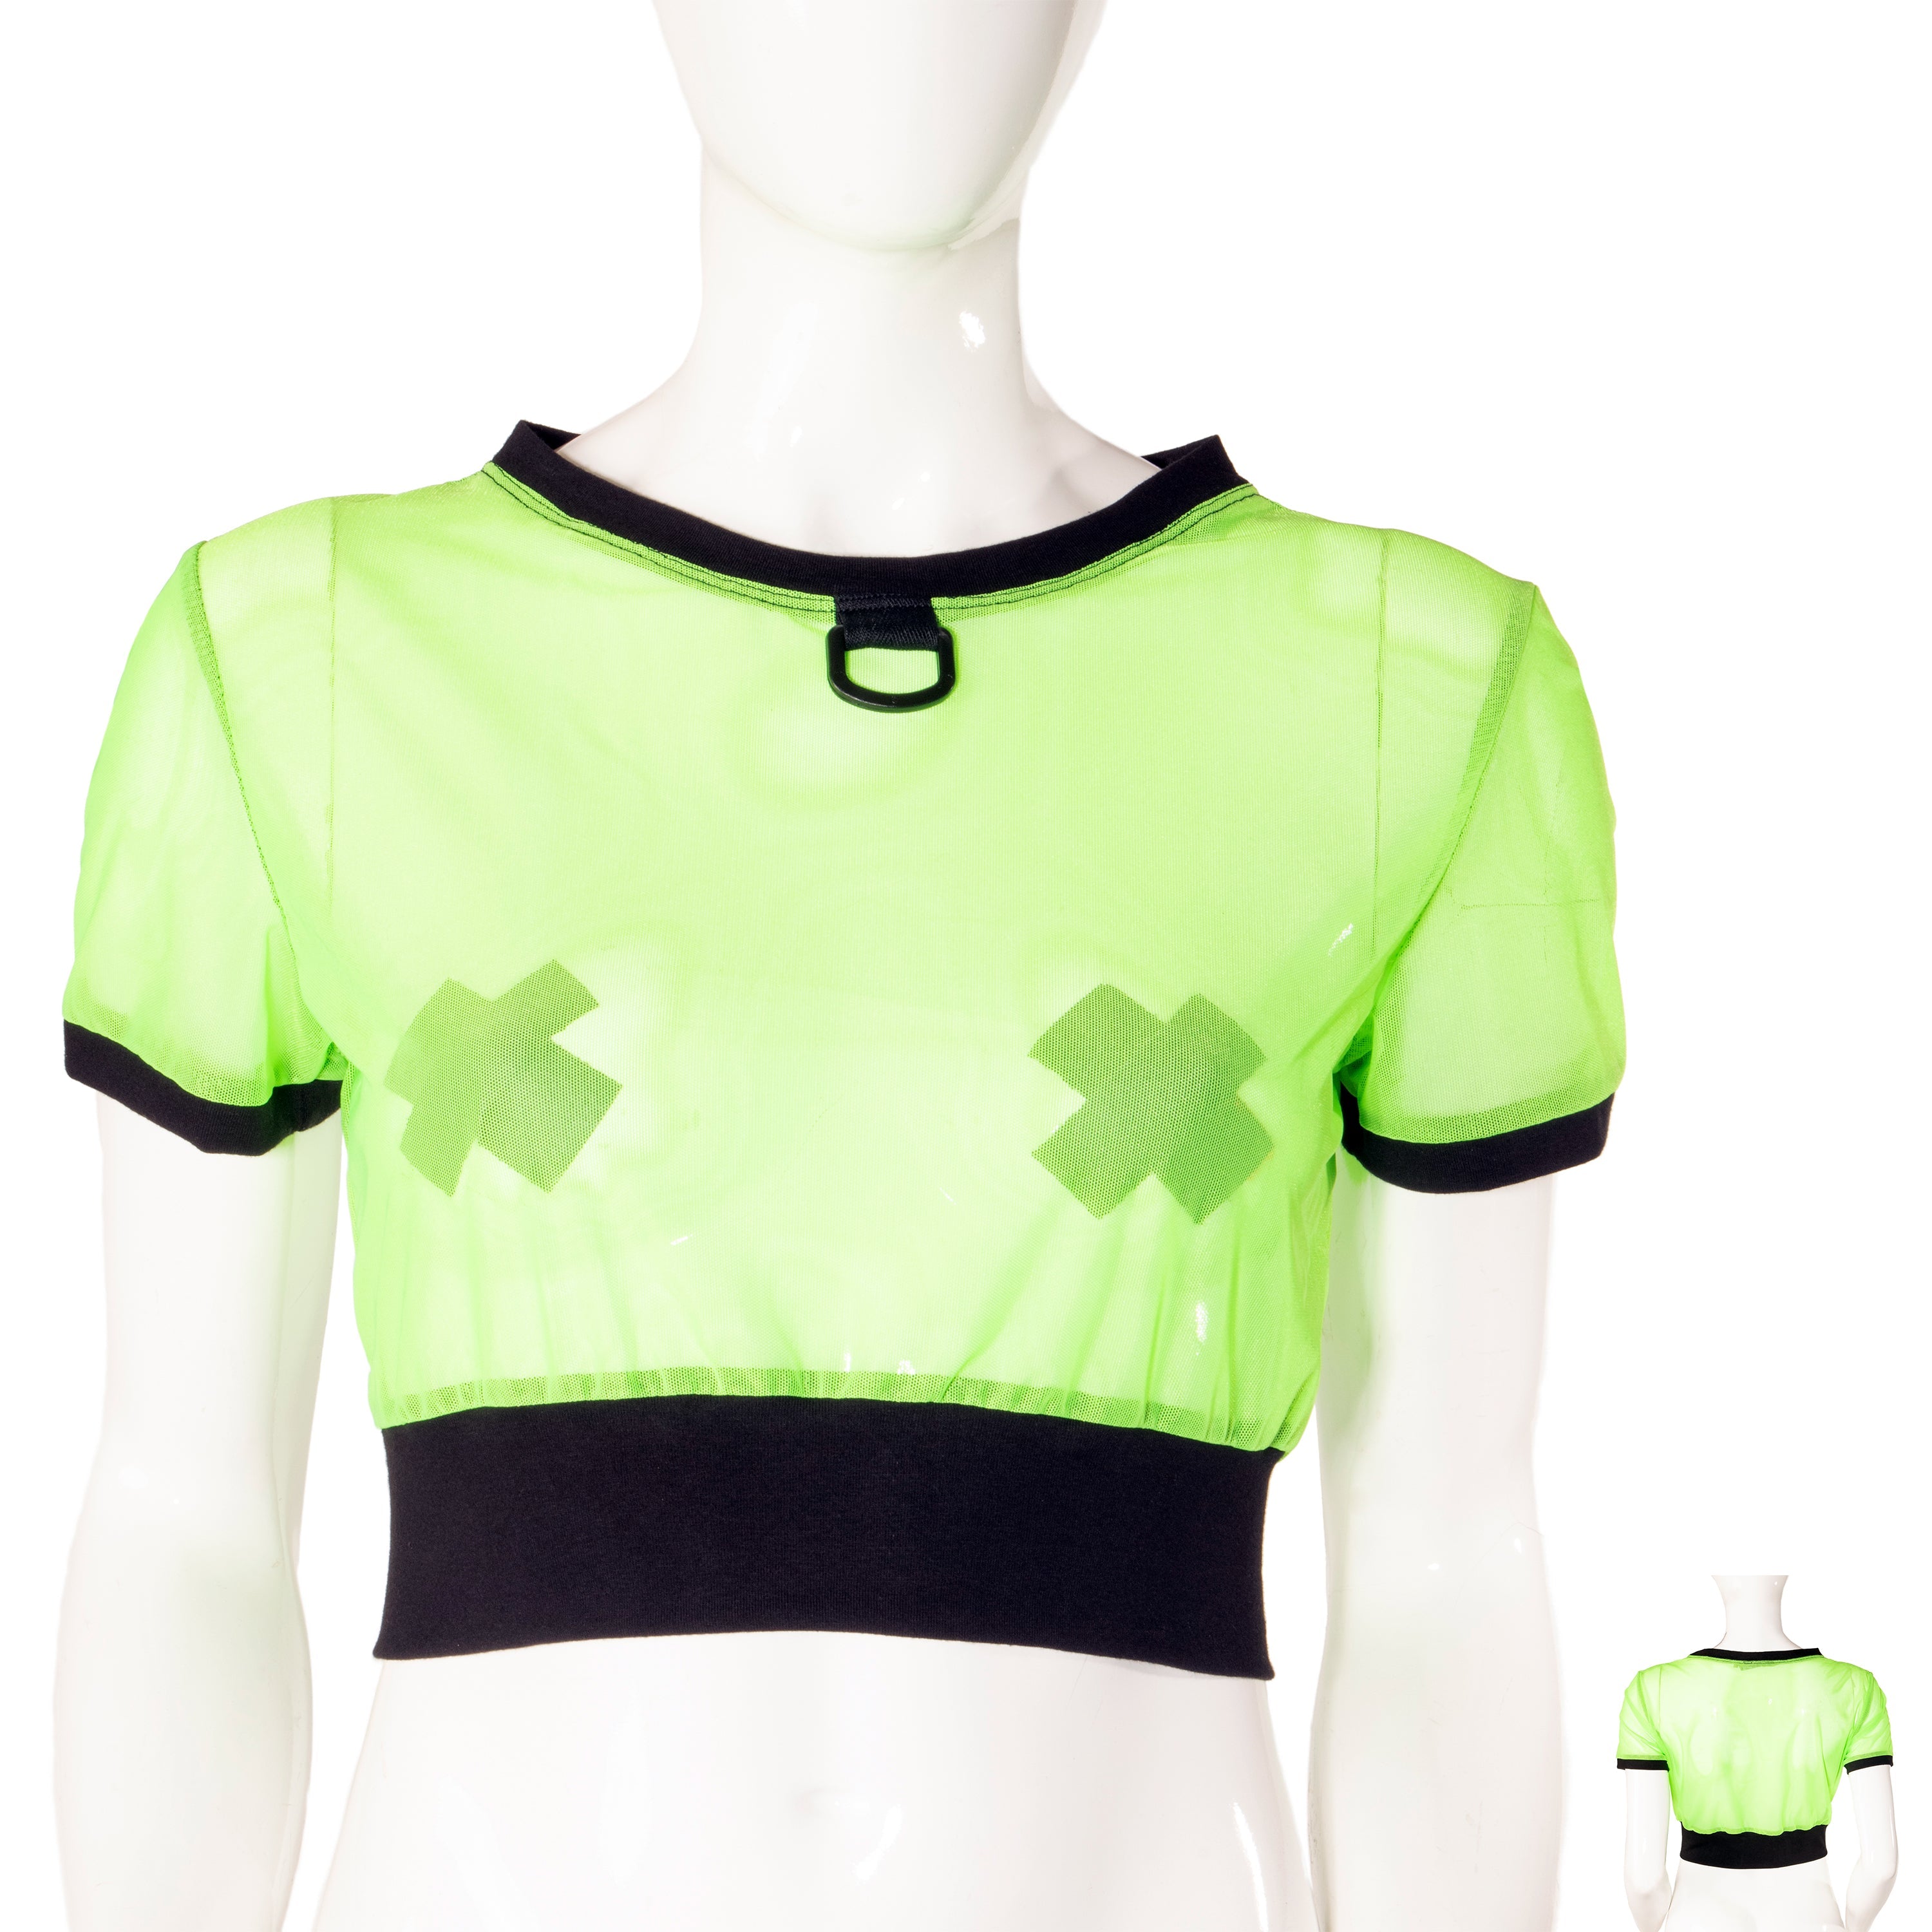 Pure Sheer Crop Shirt - Pawstar dsfusion crop top cyber, festival, rave, ship-15, ship-30day, tops